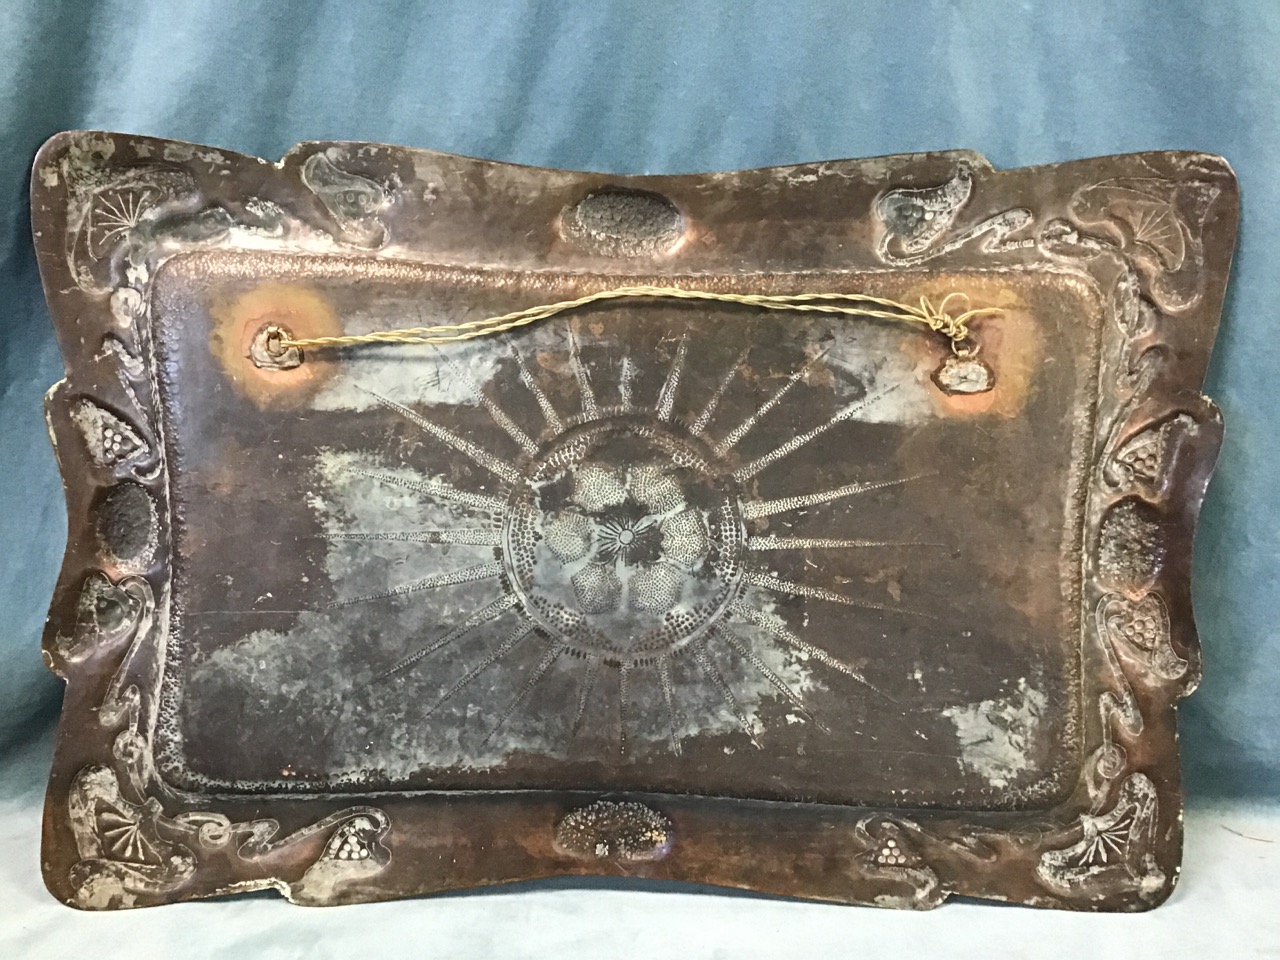 An Edwardian hand-beaten art nouveau copper tray, with central flowerhead and sunburst motif - Image 3 of 3